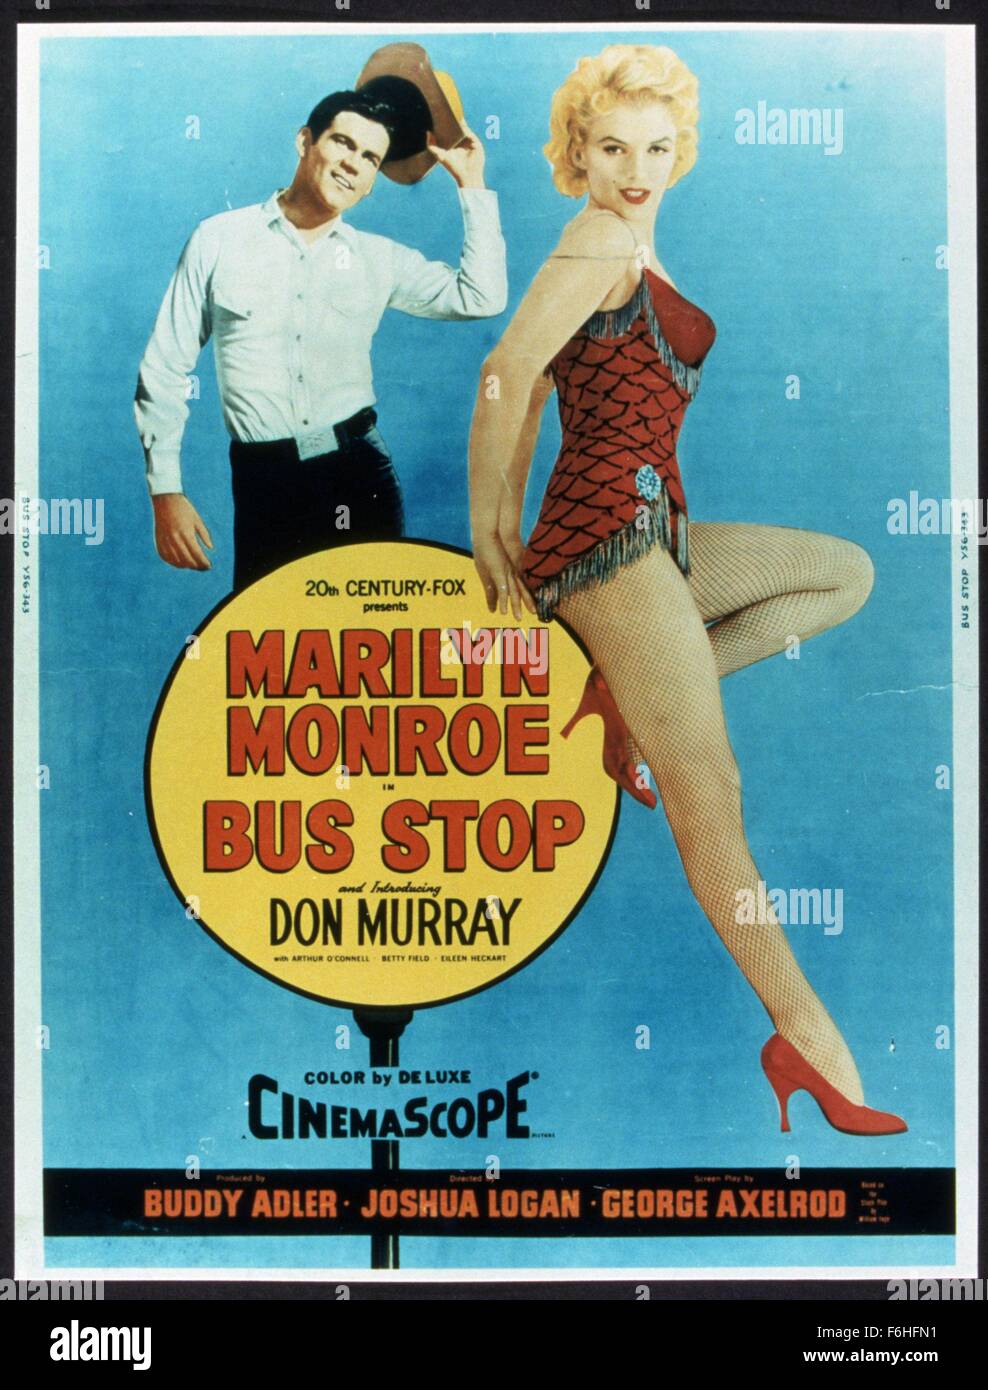 1956, Film Title: BUS STOP, Director: JOSHUA LOGAN, Studio: FOX, Pictured: LEGS, MARILYN MONROE, DON MURRAY, ROMANCE, OBSESSED, LOVE, OBSESSIVE LOVE, HIGH HEELS, COWBOY, PERFORMER, SINGER, COWBOY HAT. (Credit Image: SNAP) Stock Photo